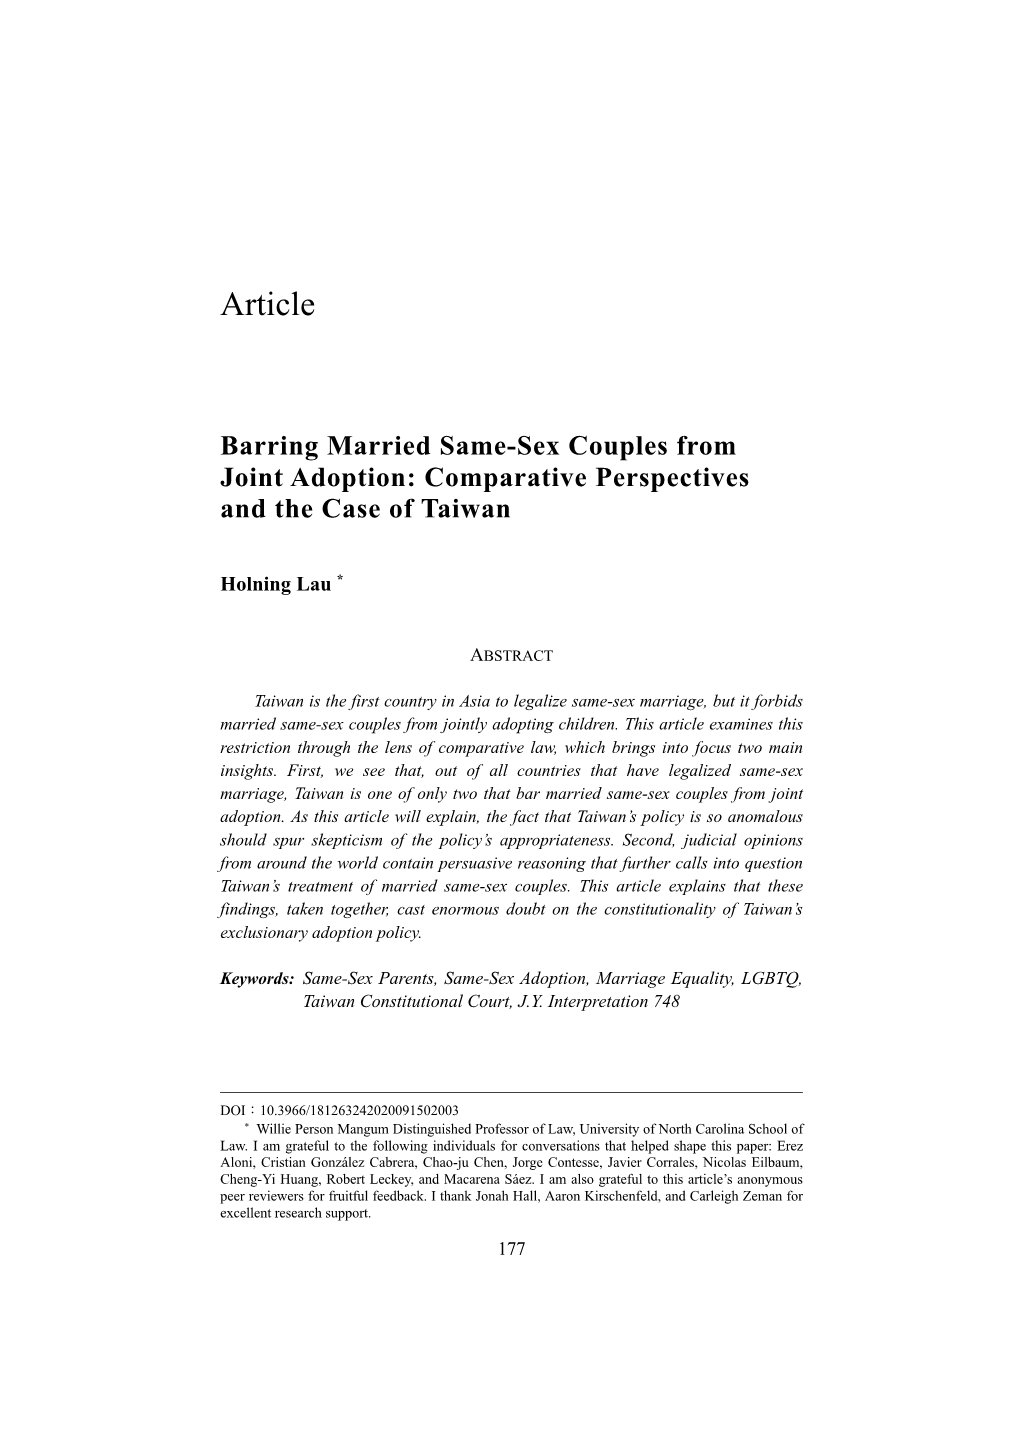 Barring Married Same-Sex Couples from Joint Adoption: Comparative Perspectives and the Case of Taiwan